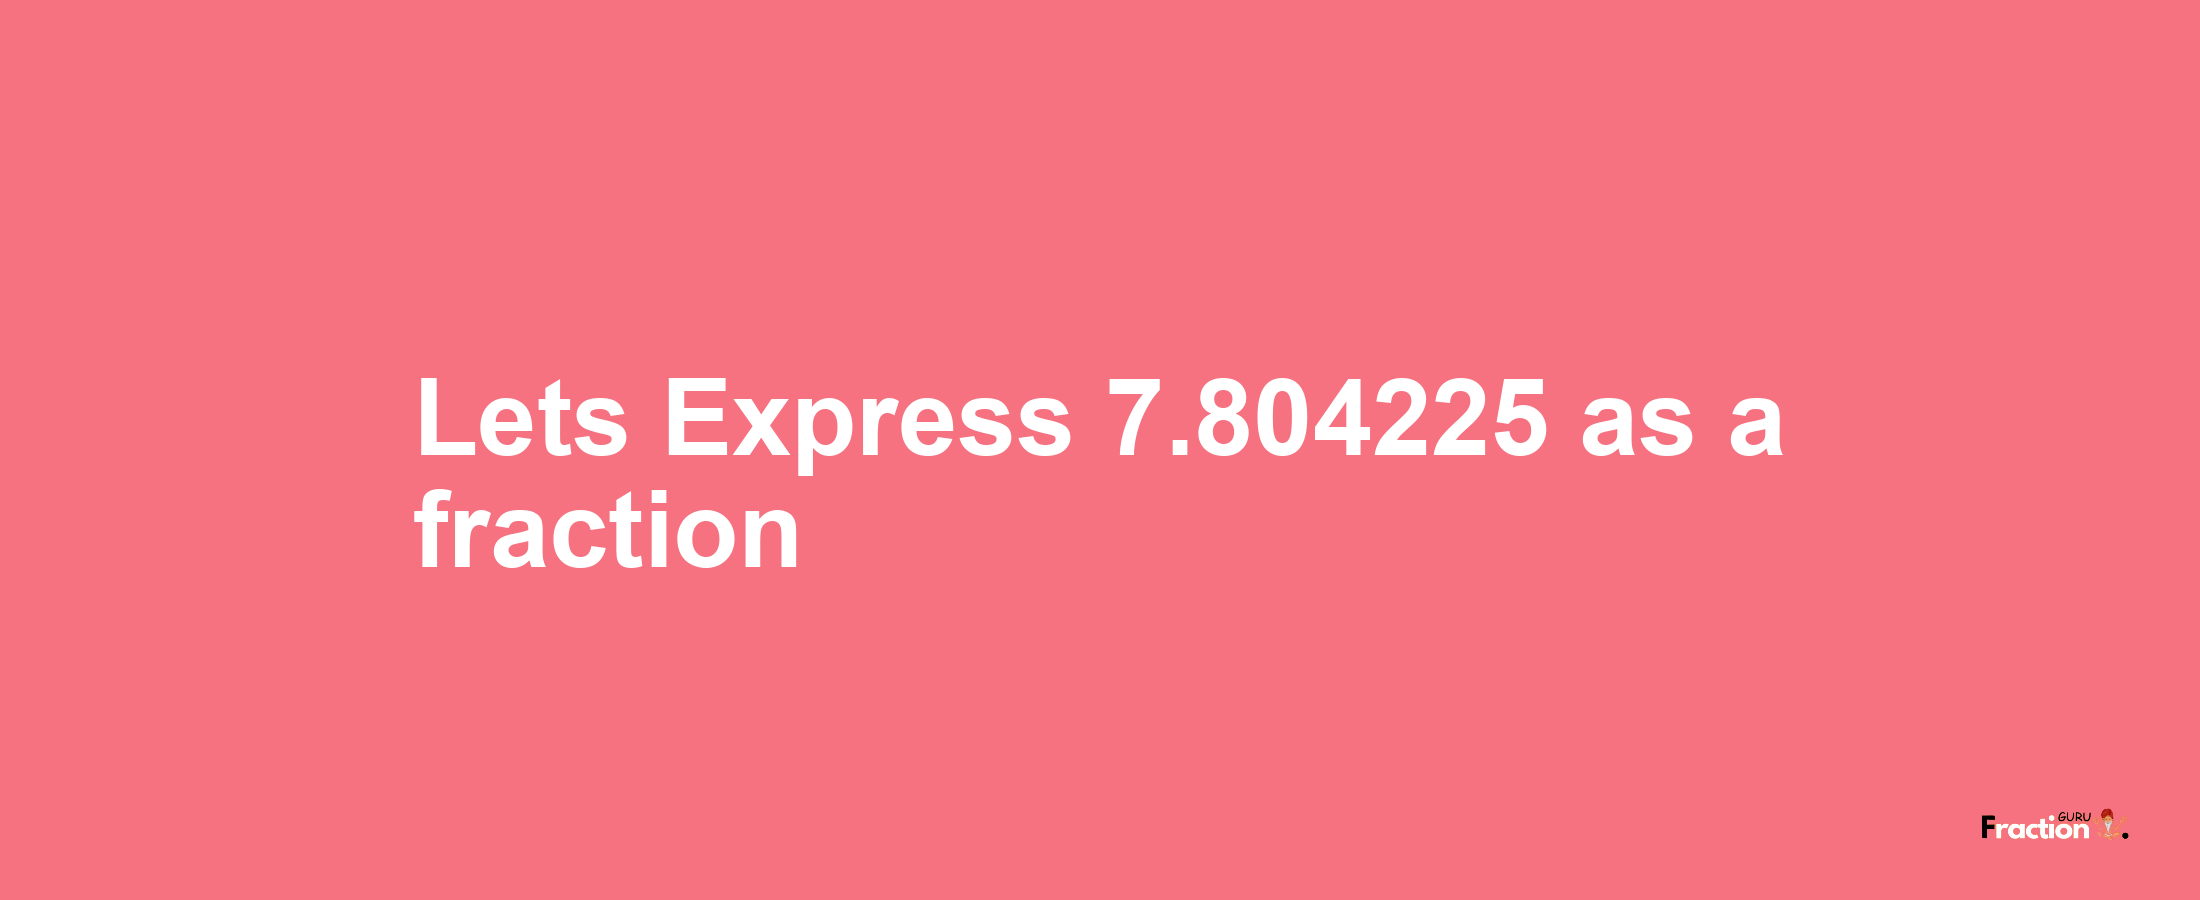 Lets Express 7.804225 as afraction